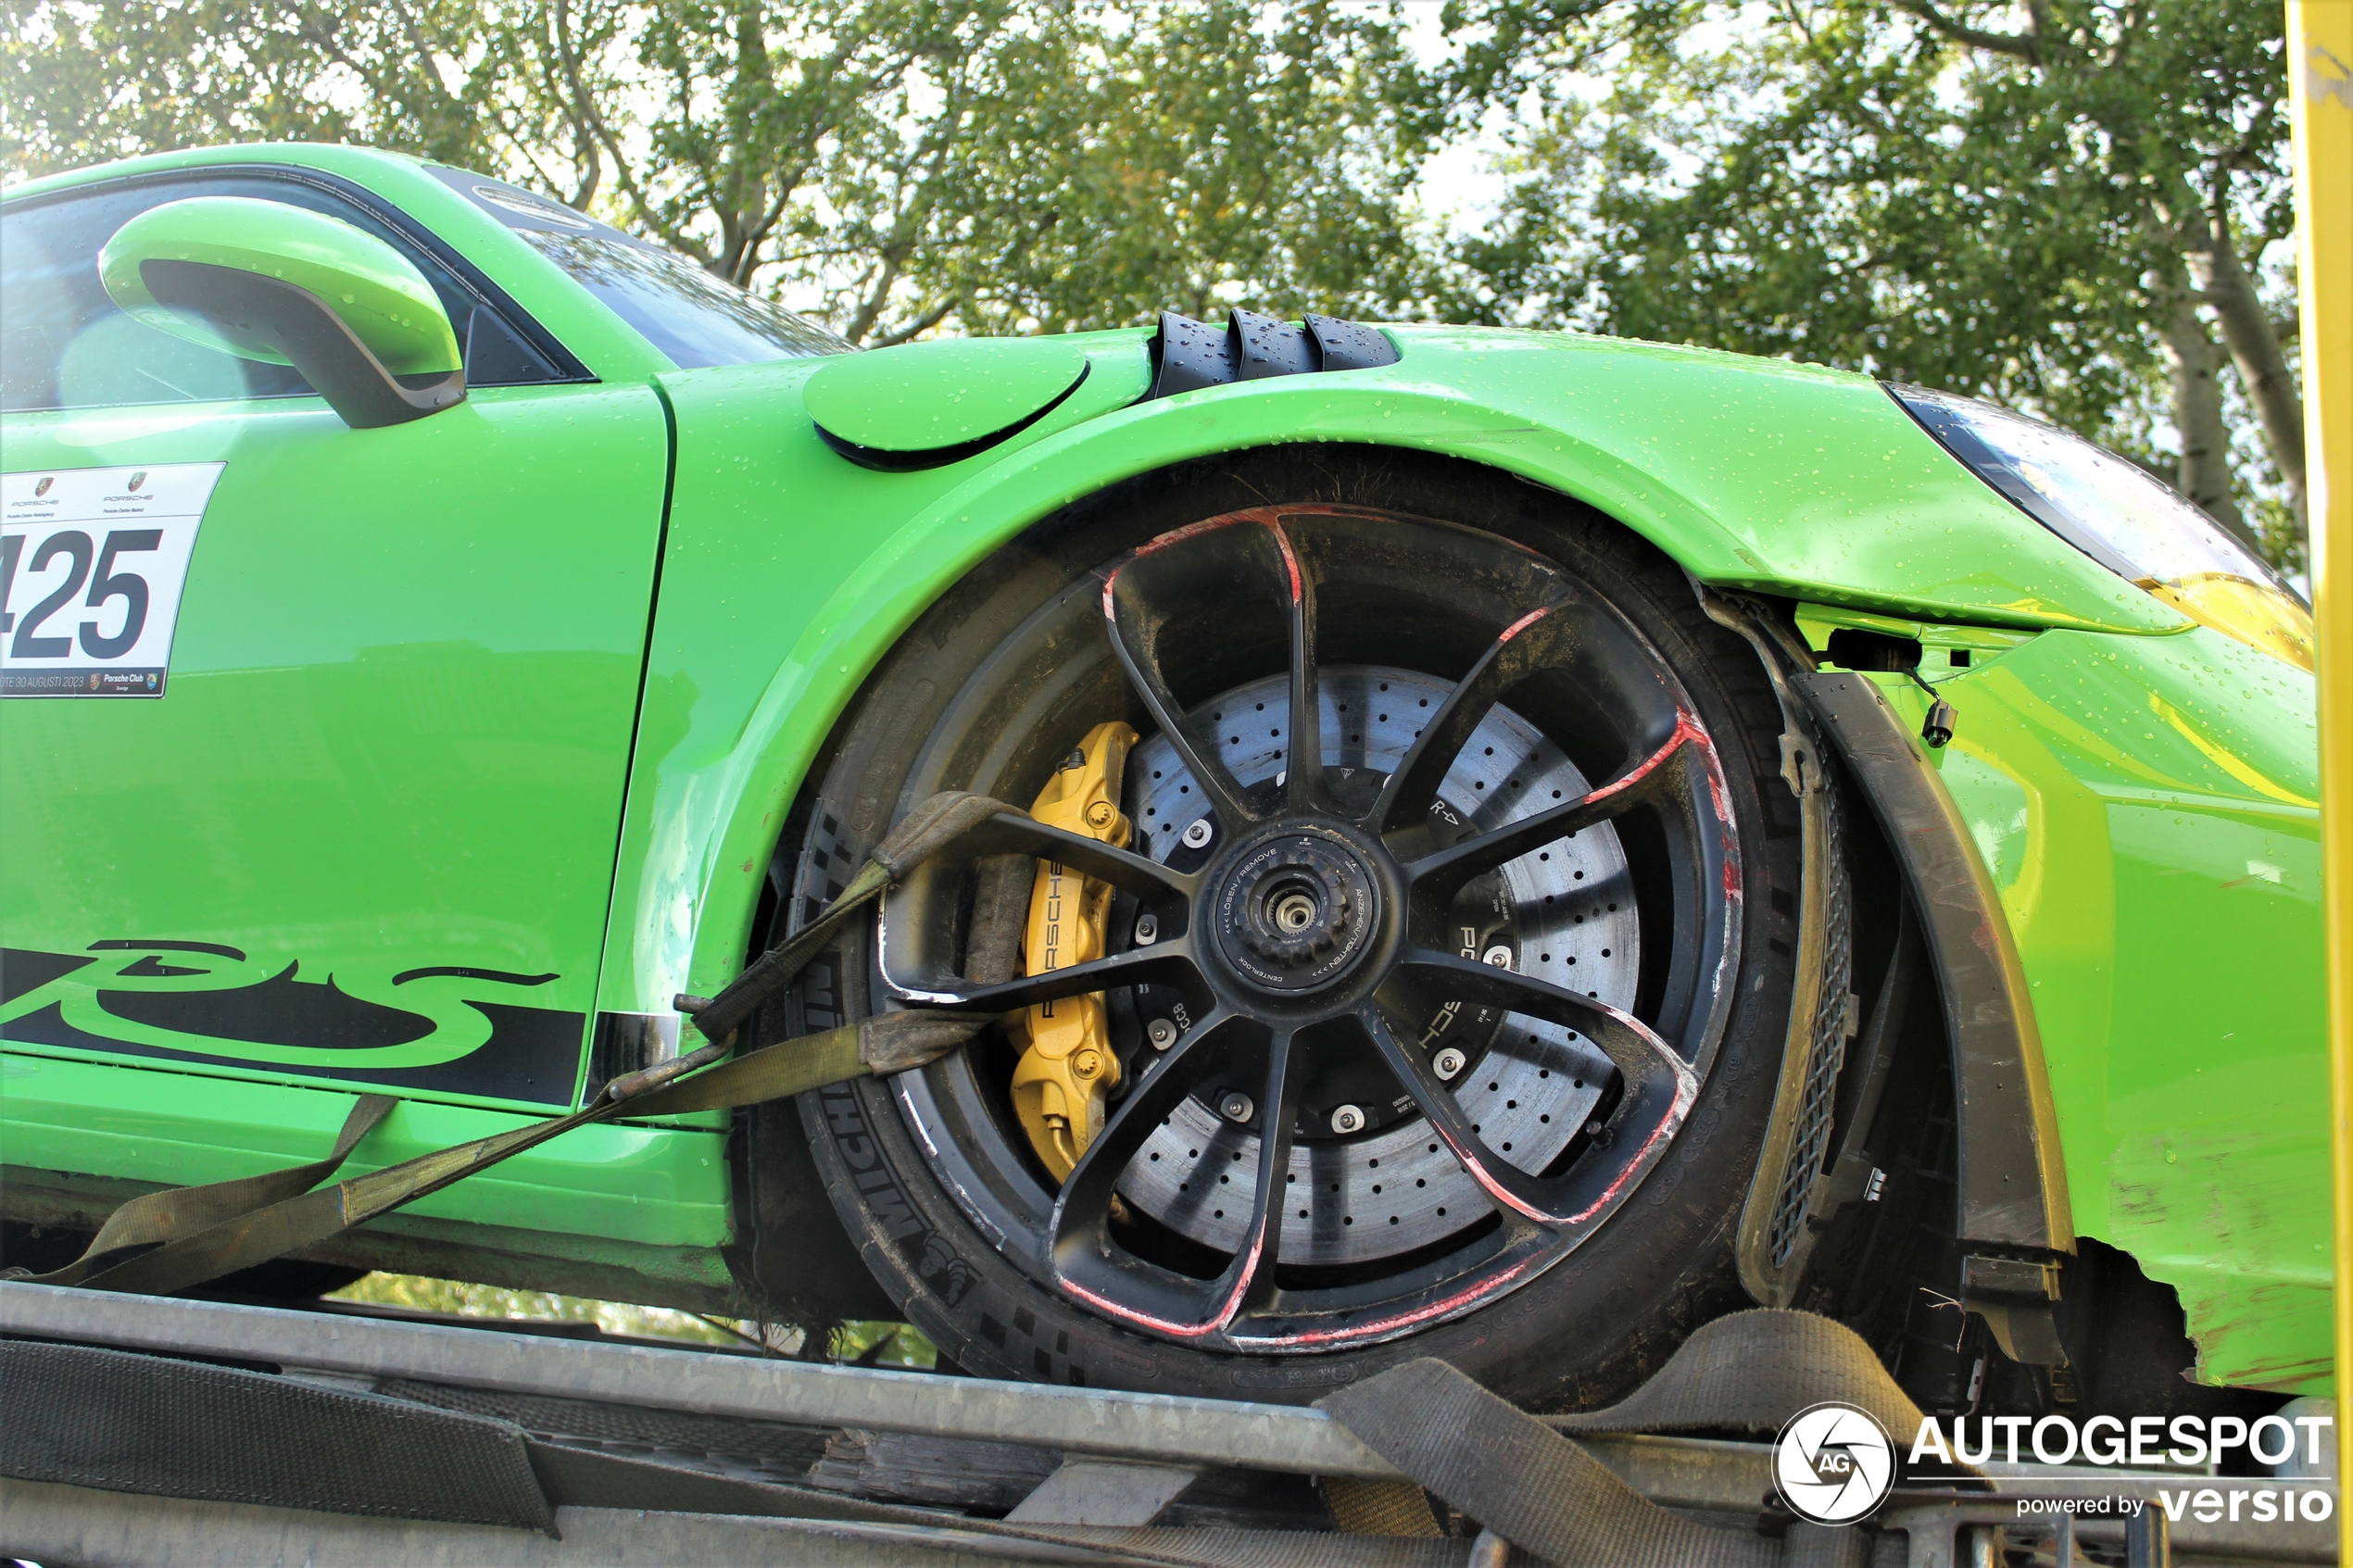 An frightening sight of this GT3 RS